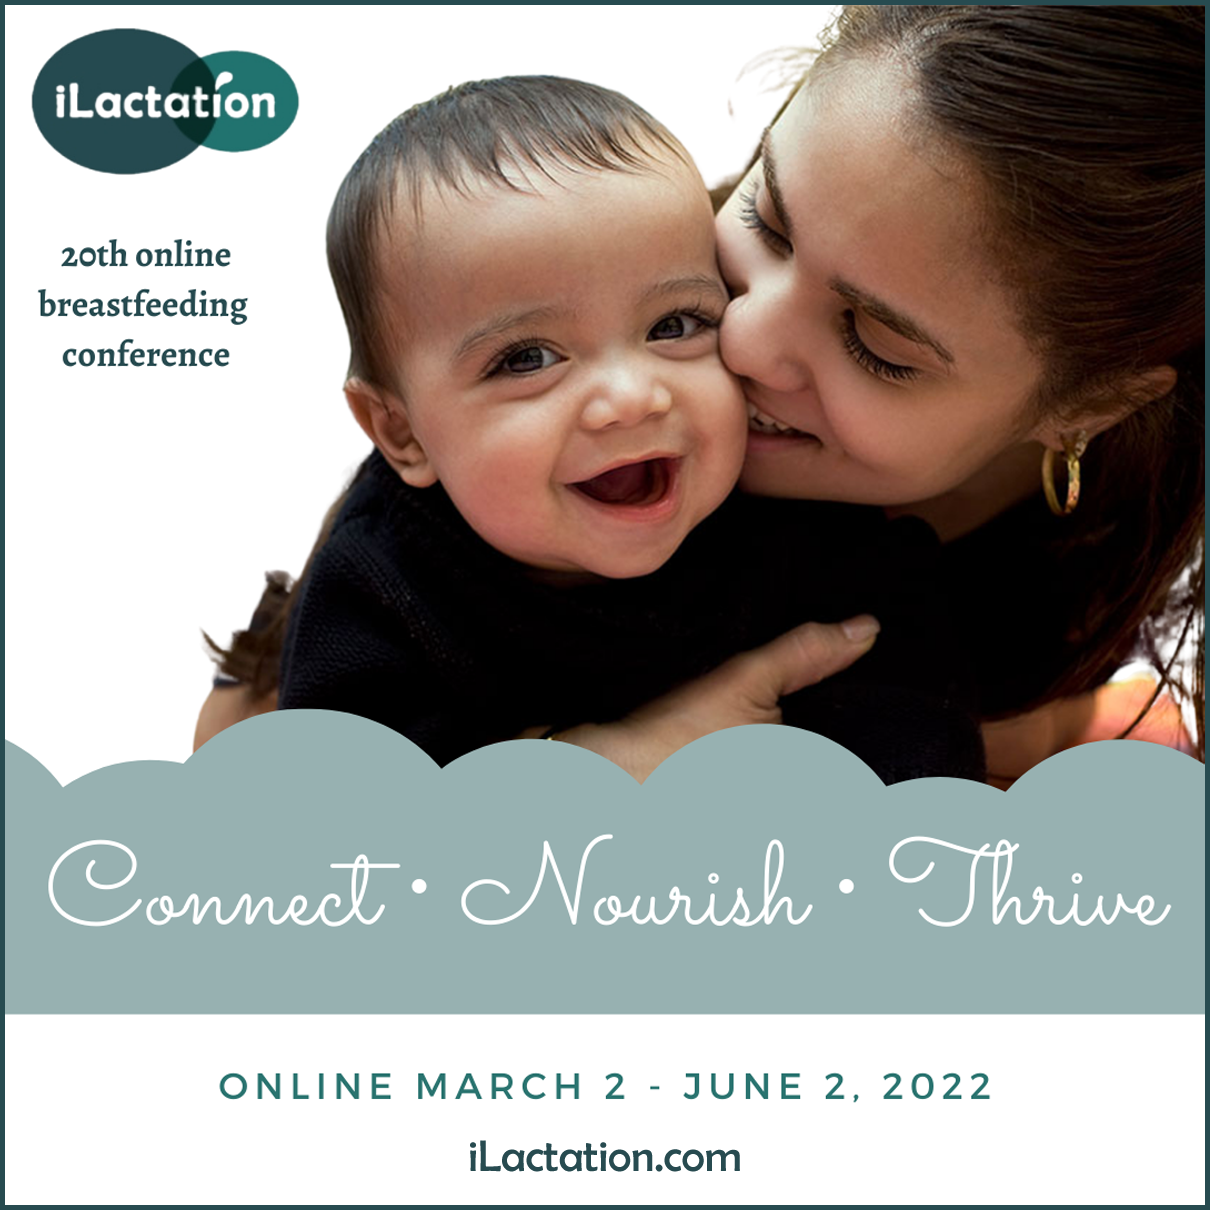 iLactation’s online breastfeeding conference, Connect • Nourish • Thrive